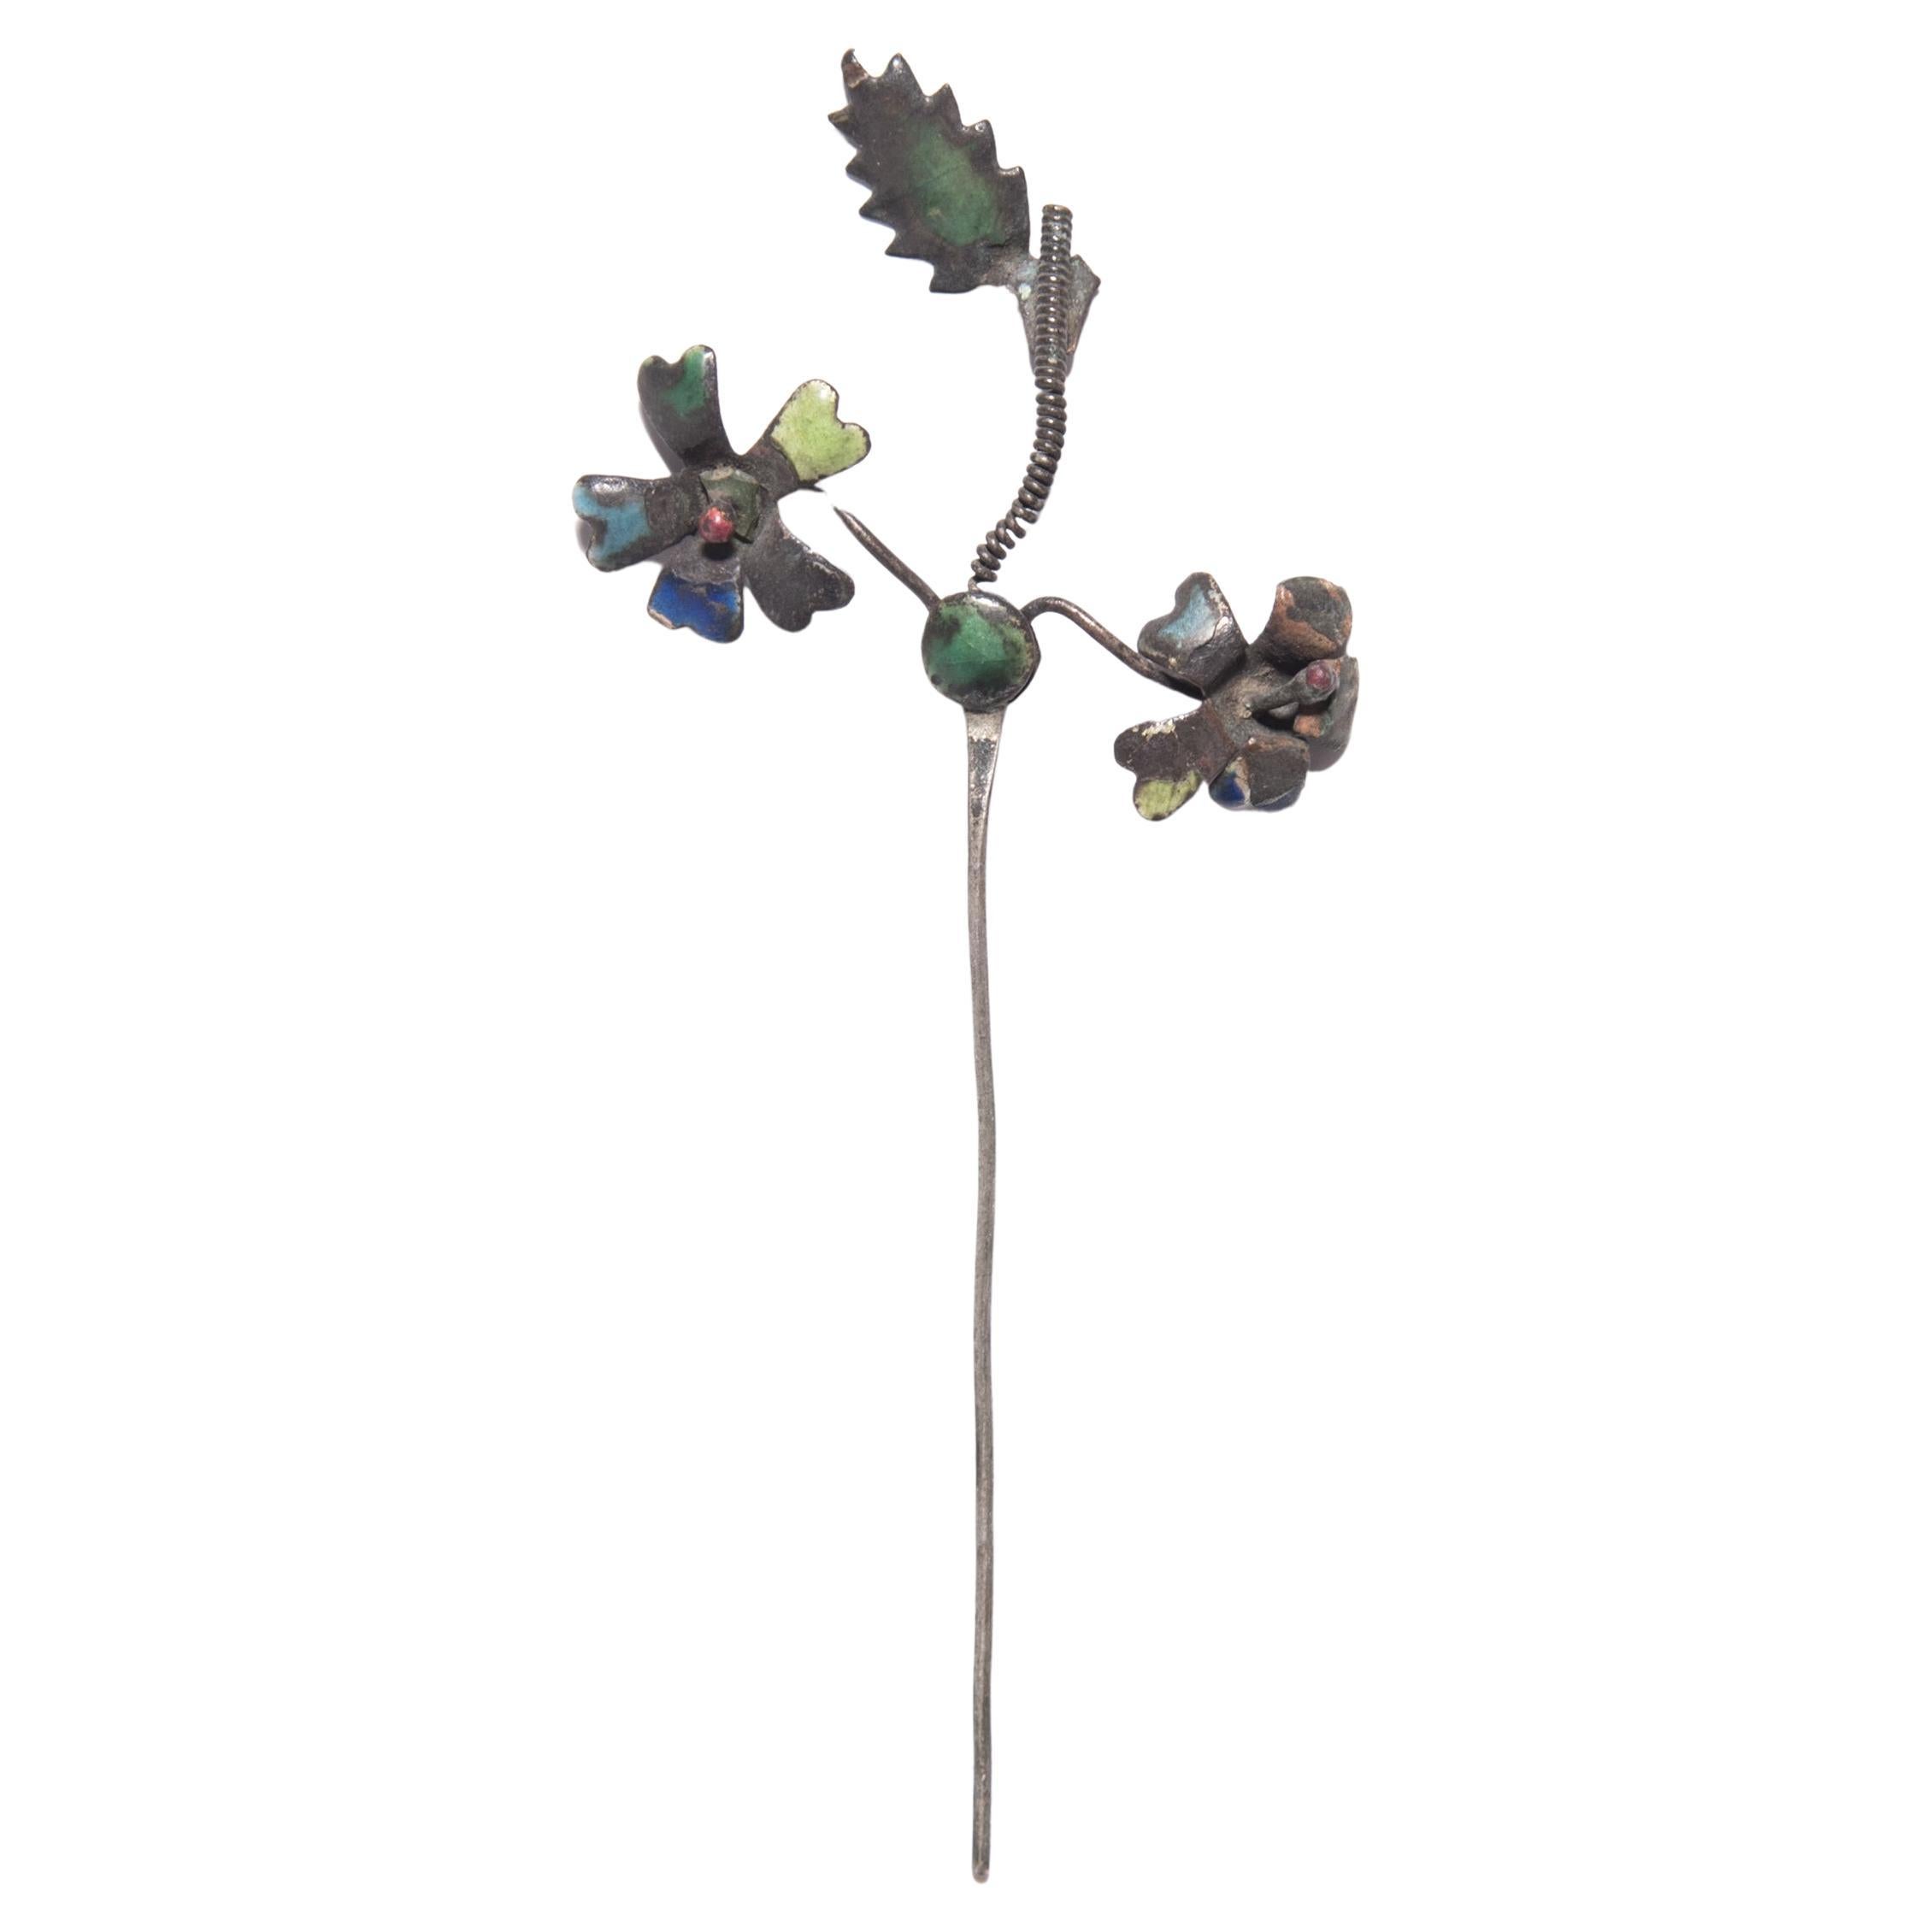 Chinese Enameled Floral Hairpin, C. 1900